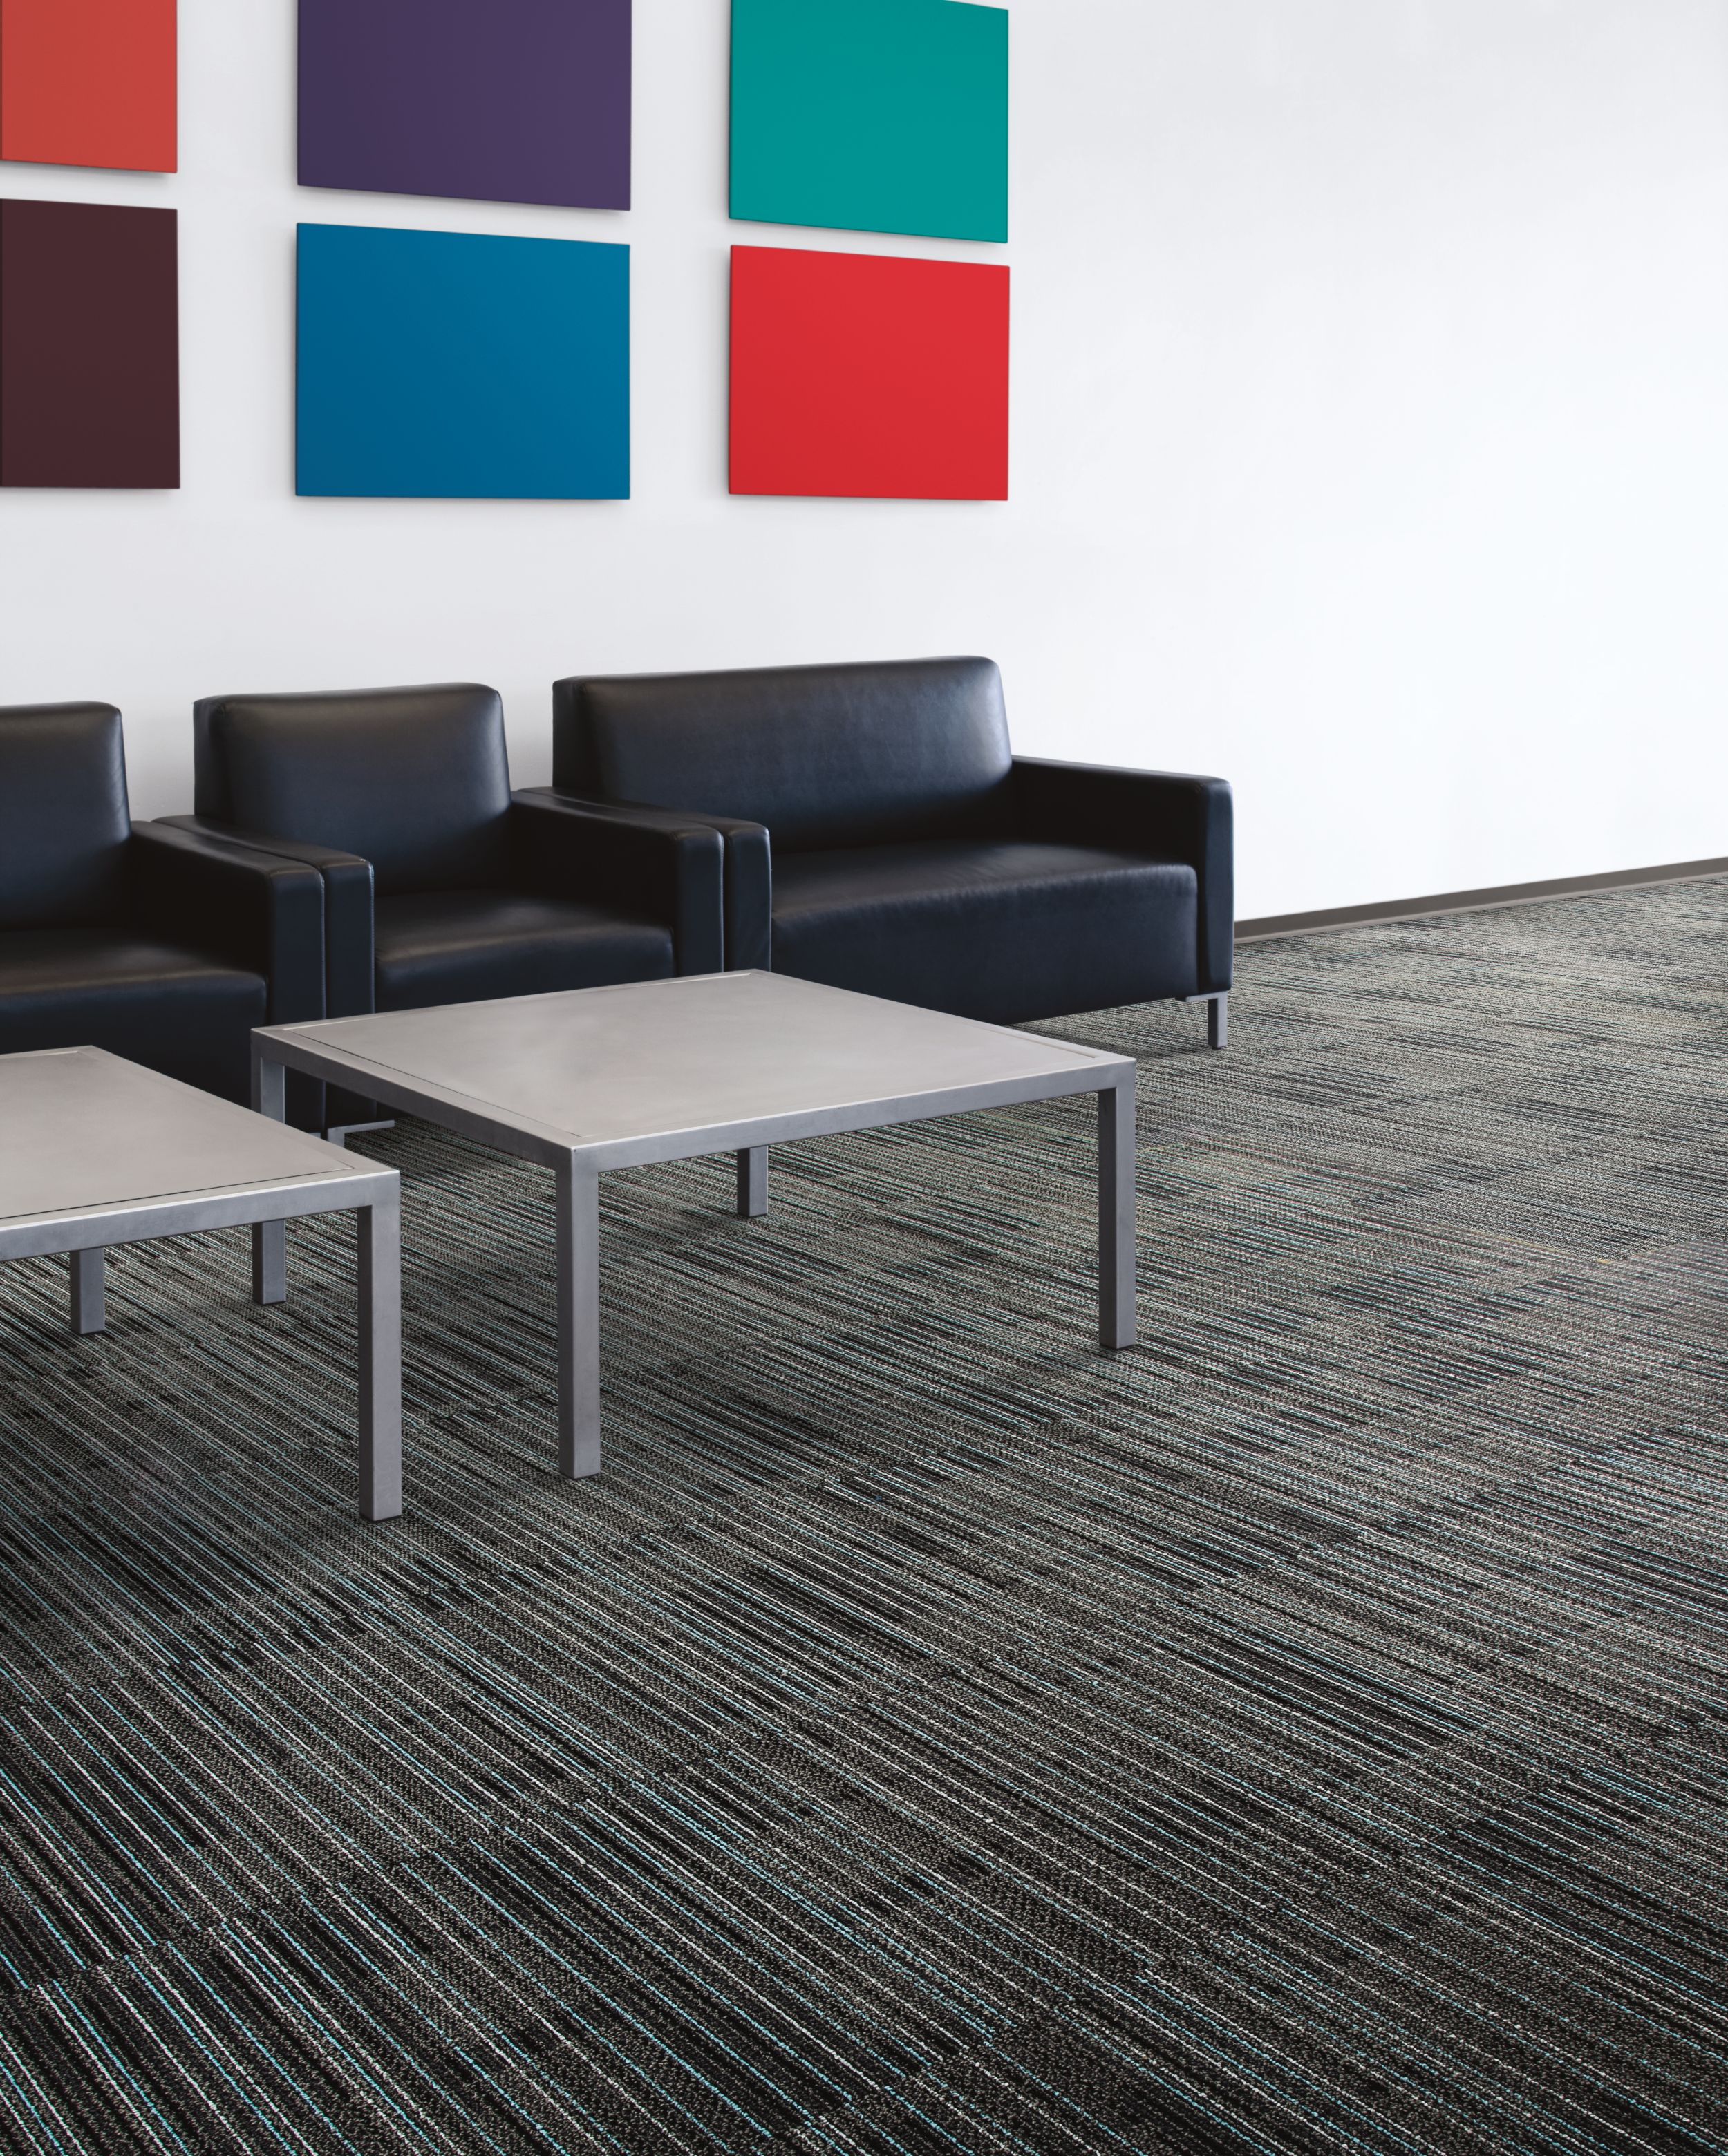 Interface Gather carpet tile in seating area with black chairs and colorful artwork image number 7